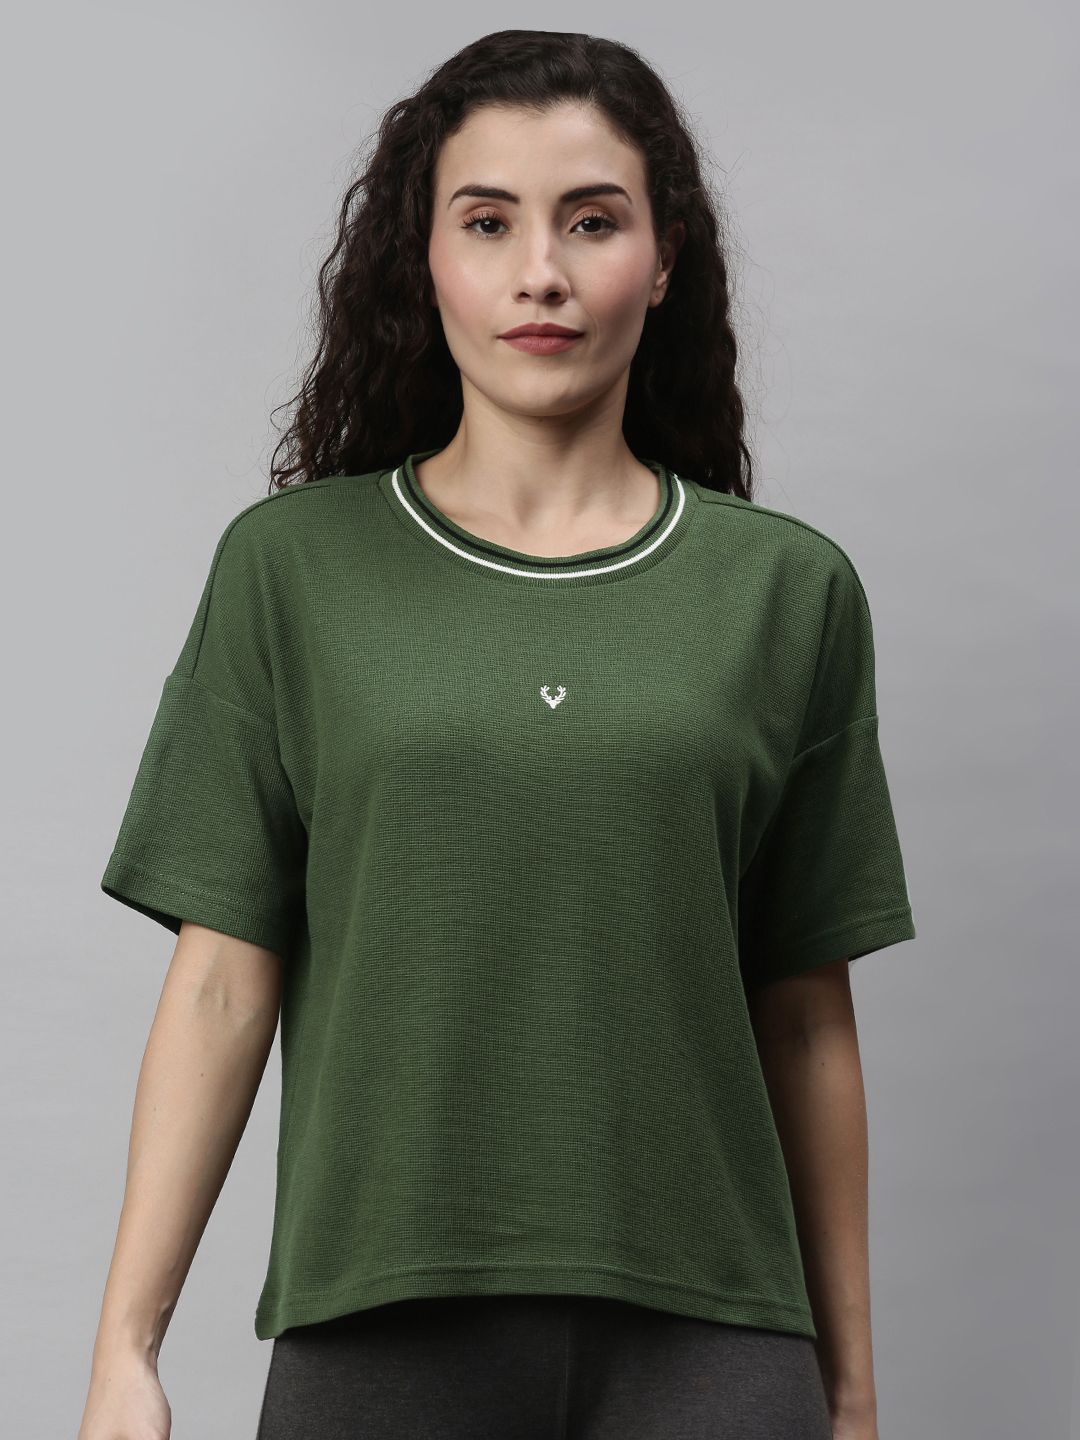 Allen Solly Woman Olive Green Solid Round Neck Cotton Lounge T-shirt Price in India